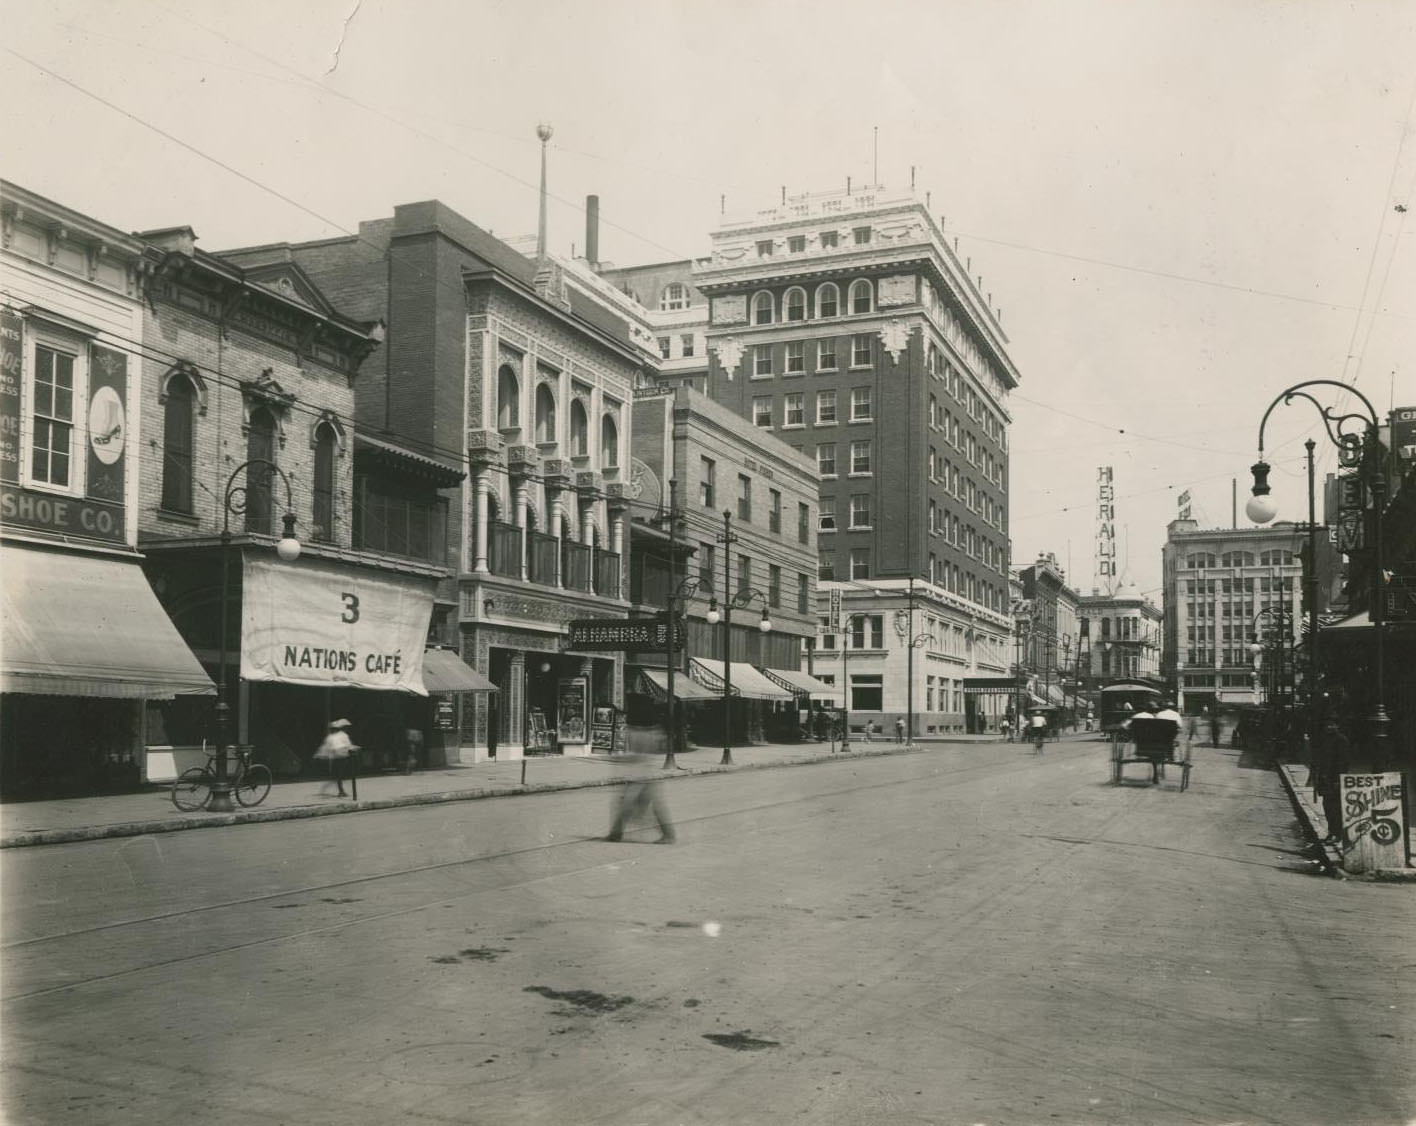 A street in El Paso with various stores seen on the side to the left and a sign for the "Herald" seen in the background, 1900s